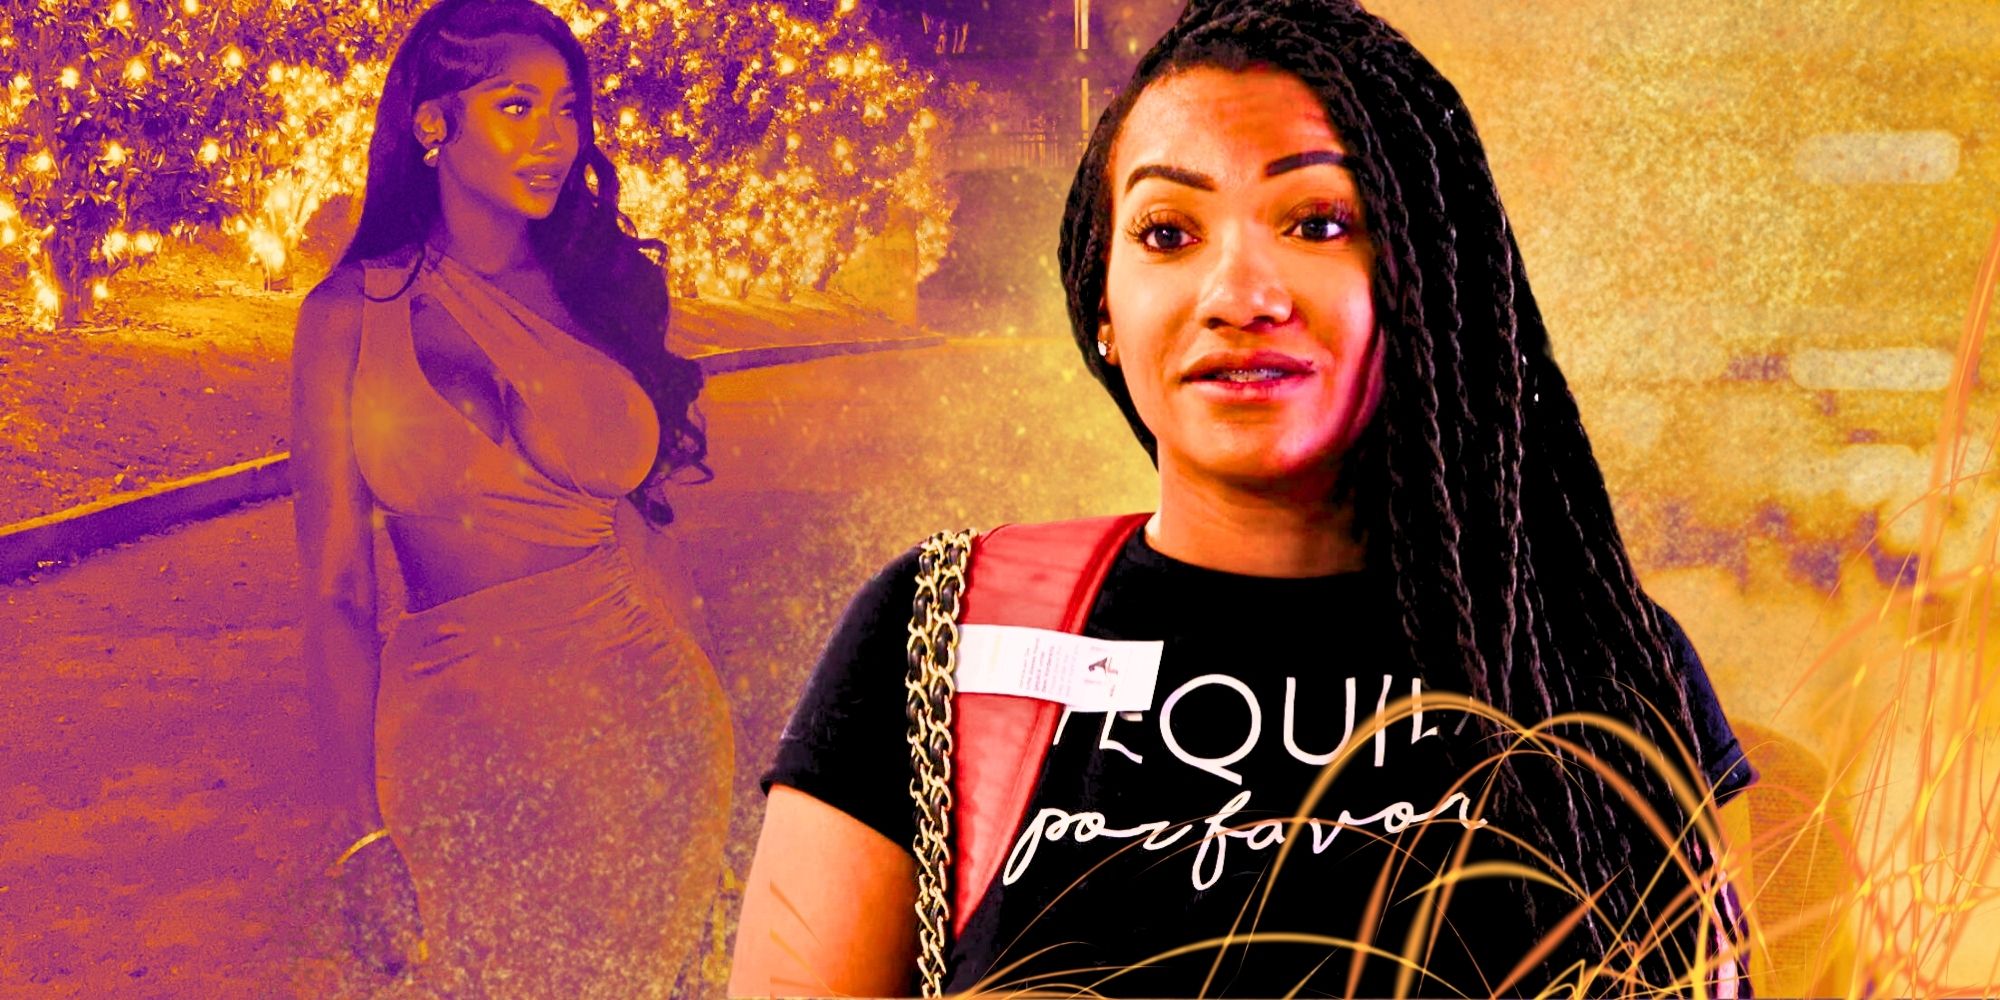 brittany banks in t shirt montage with peach and yellow background 90 day fiance